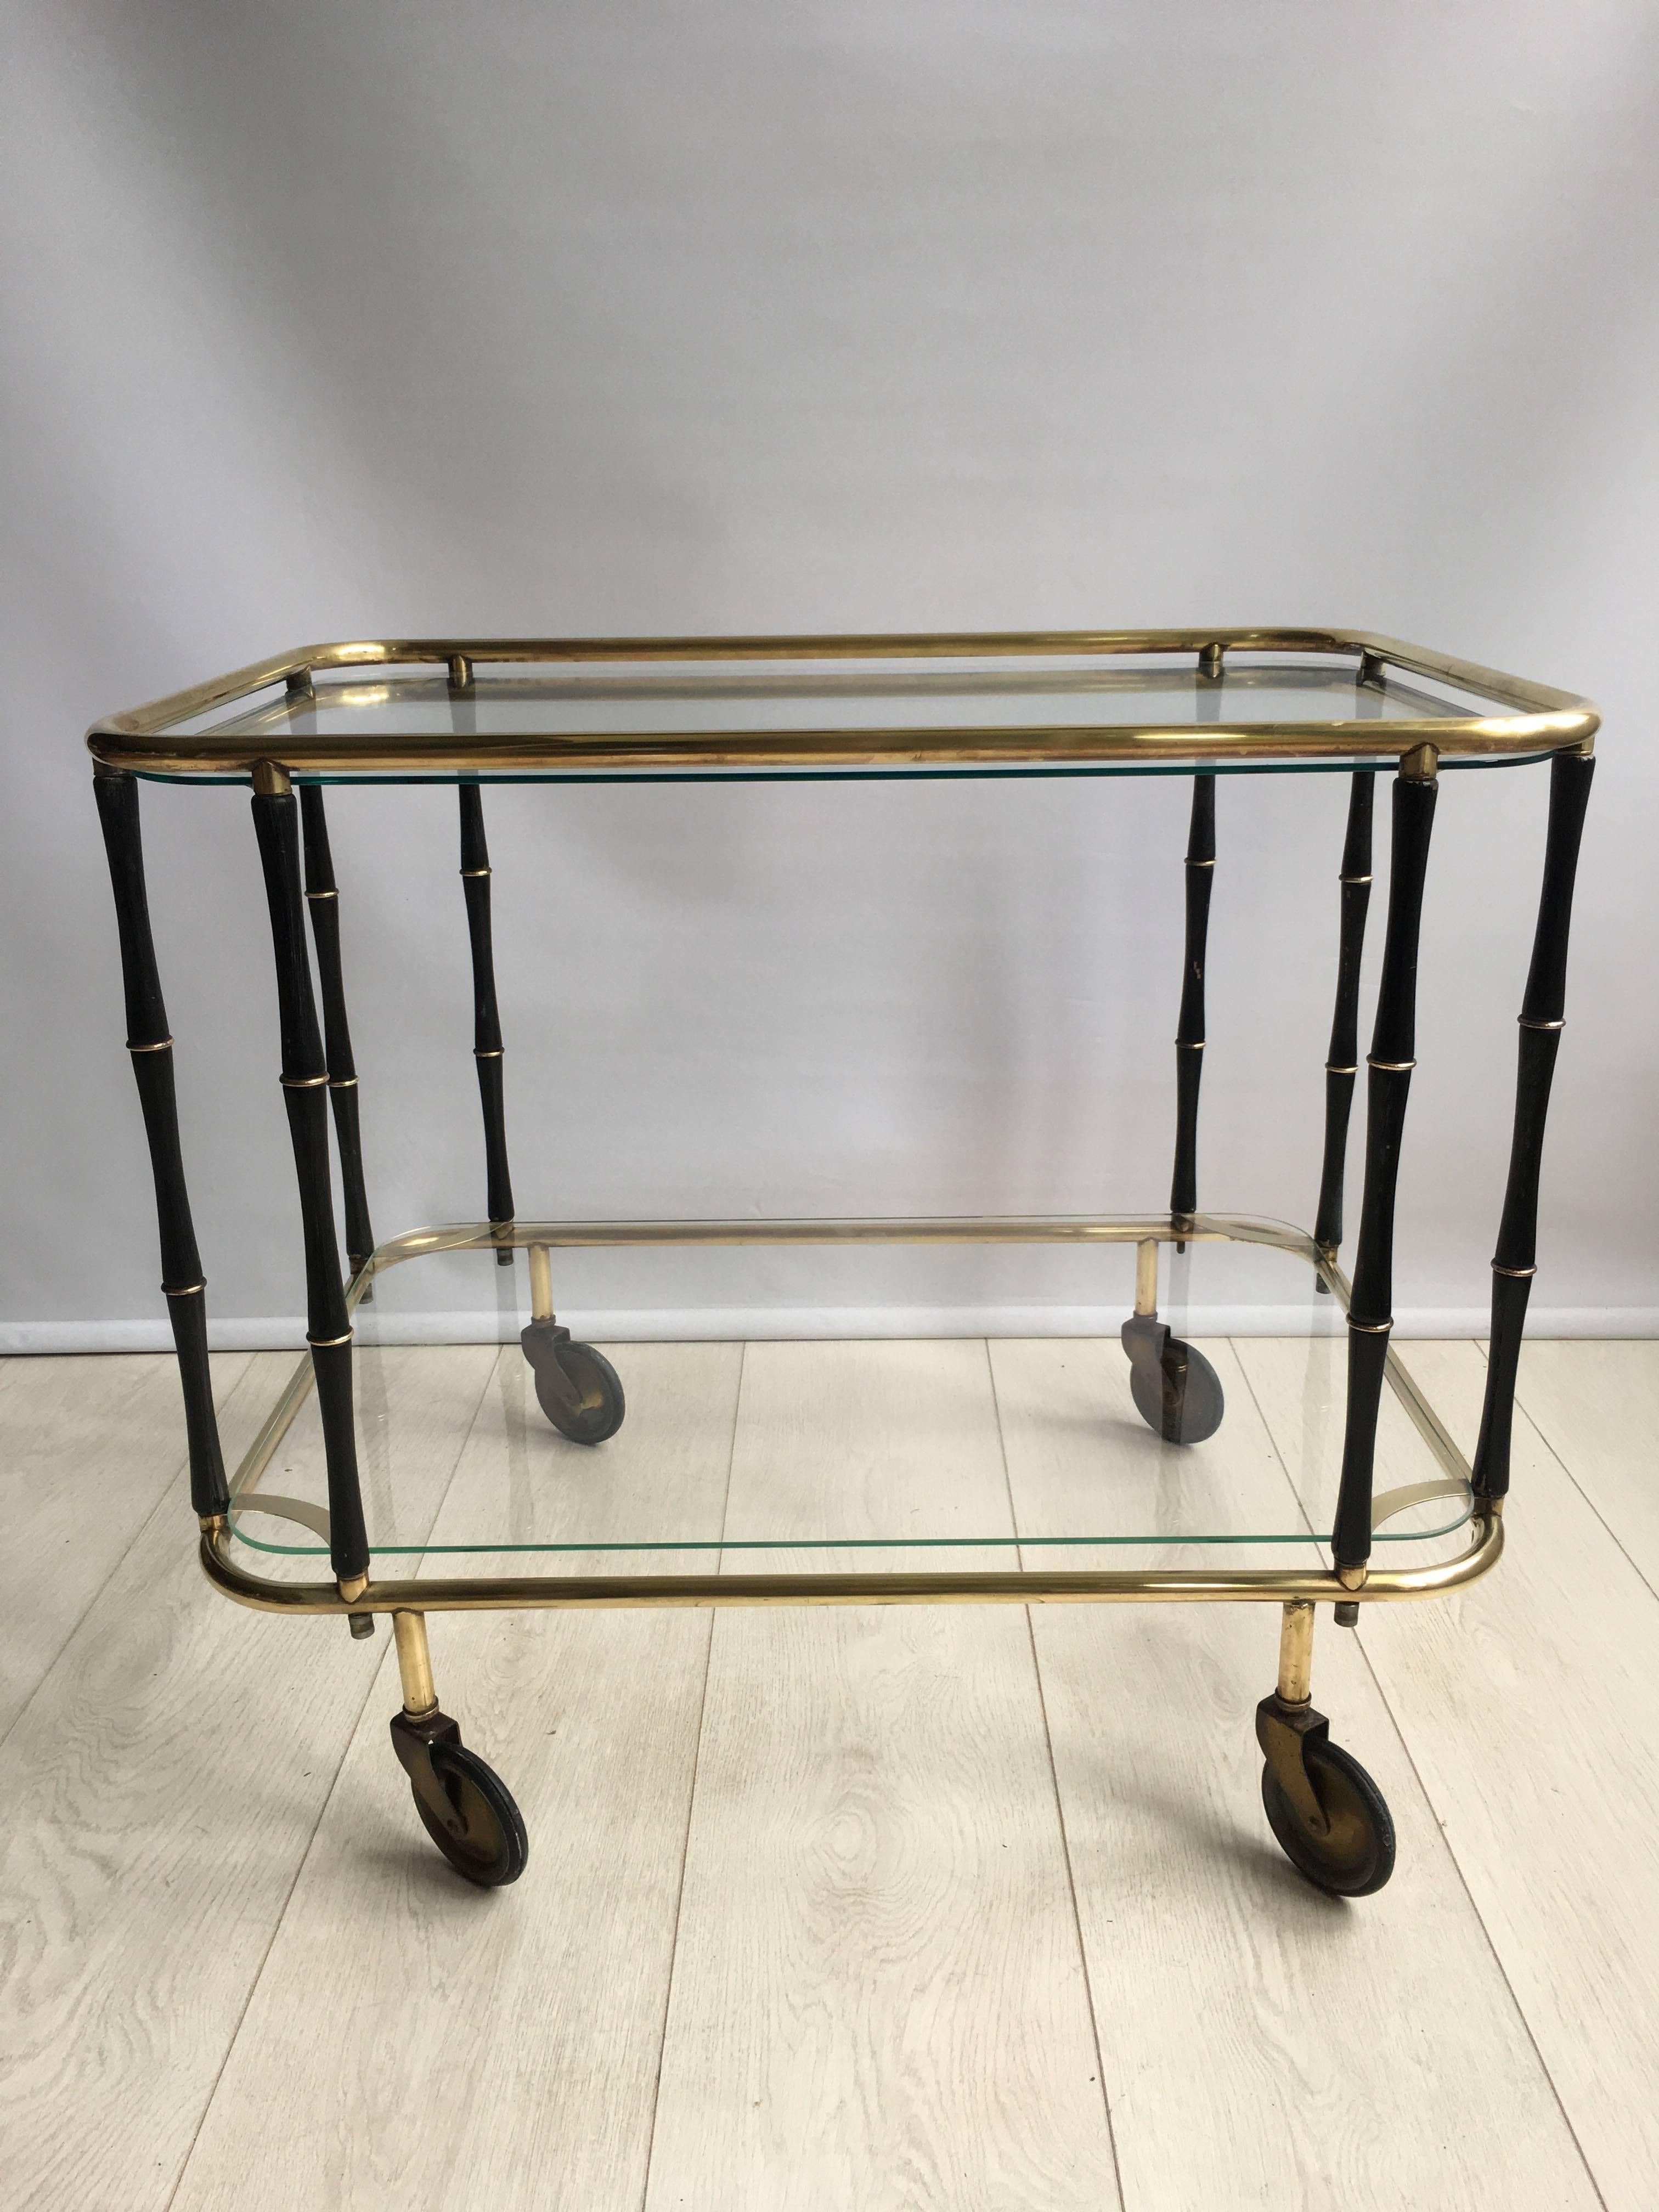 Midcentury drinks trolley from France, circa 1960

Ebonized bamboo legs on a brass frame.

Measuring 66.5cm wide by 45cm deep and 56.5cm tall.